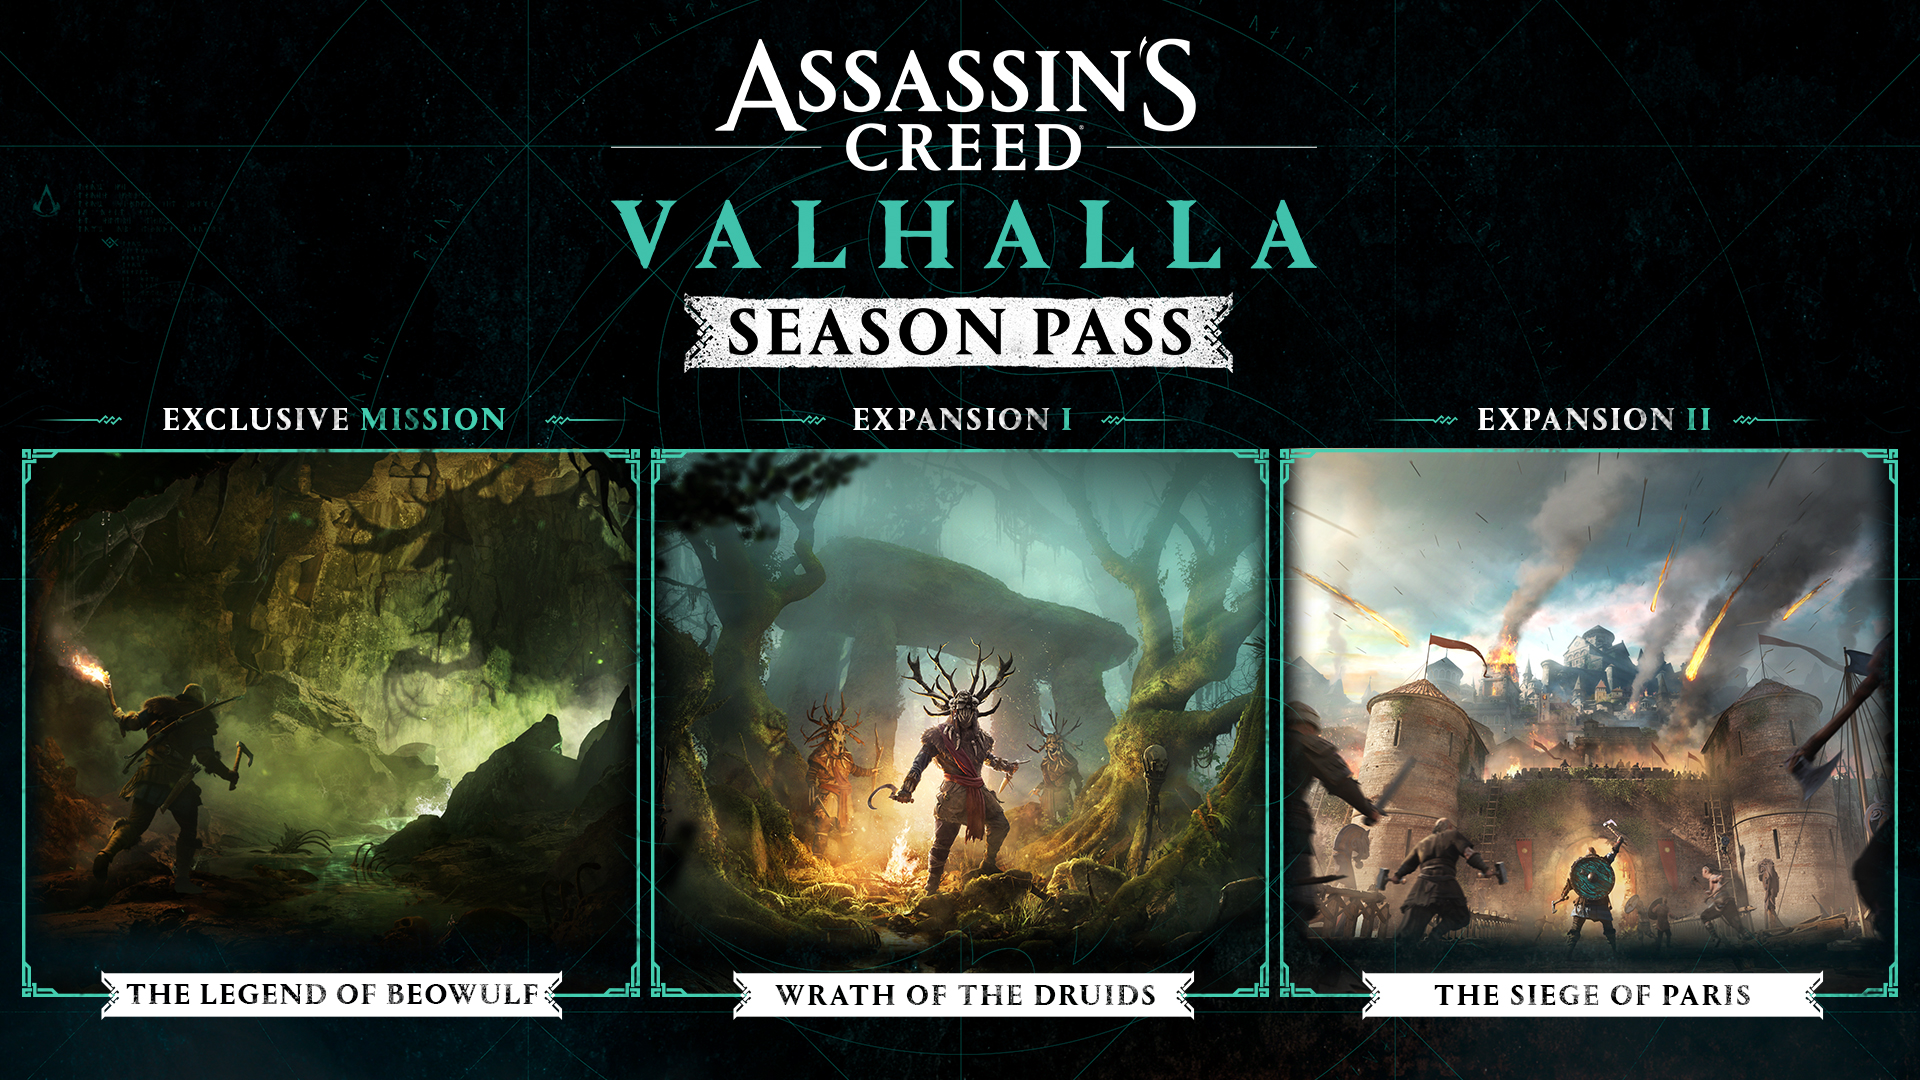 Assassin's Creed Valhalla is finally coming to Steam in December